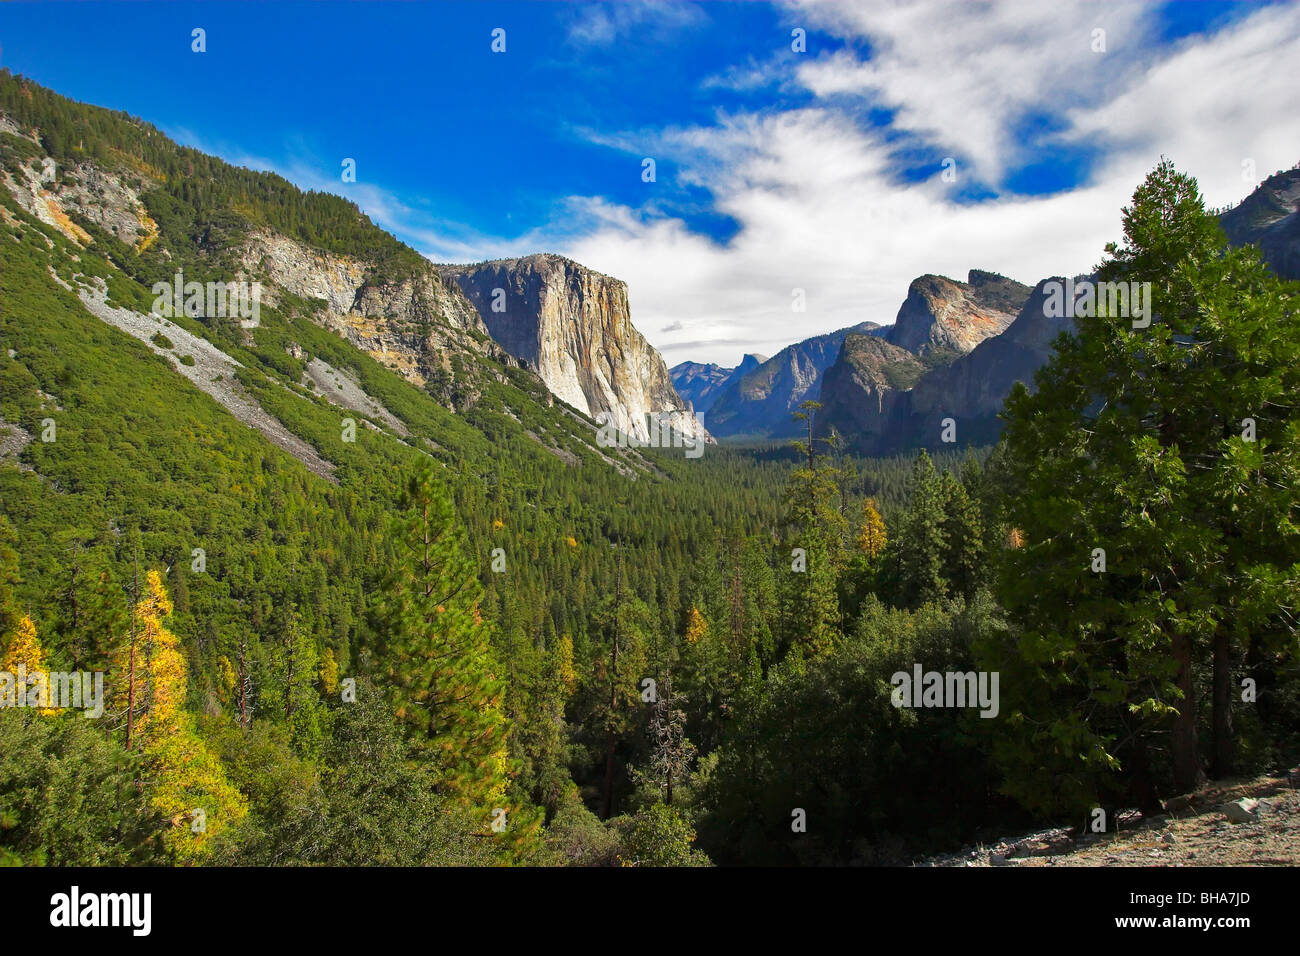 The well-known reserve Yosemite -park in the USA Stock Photo